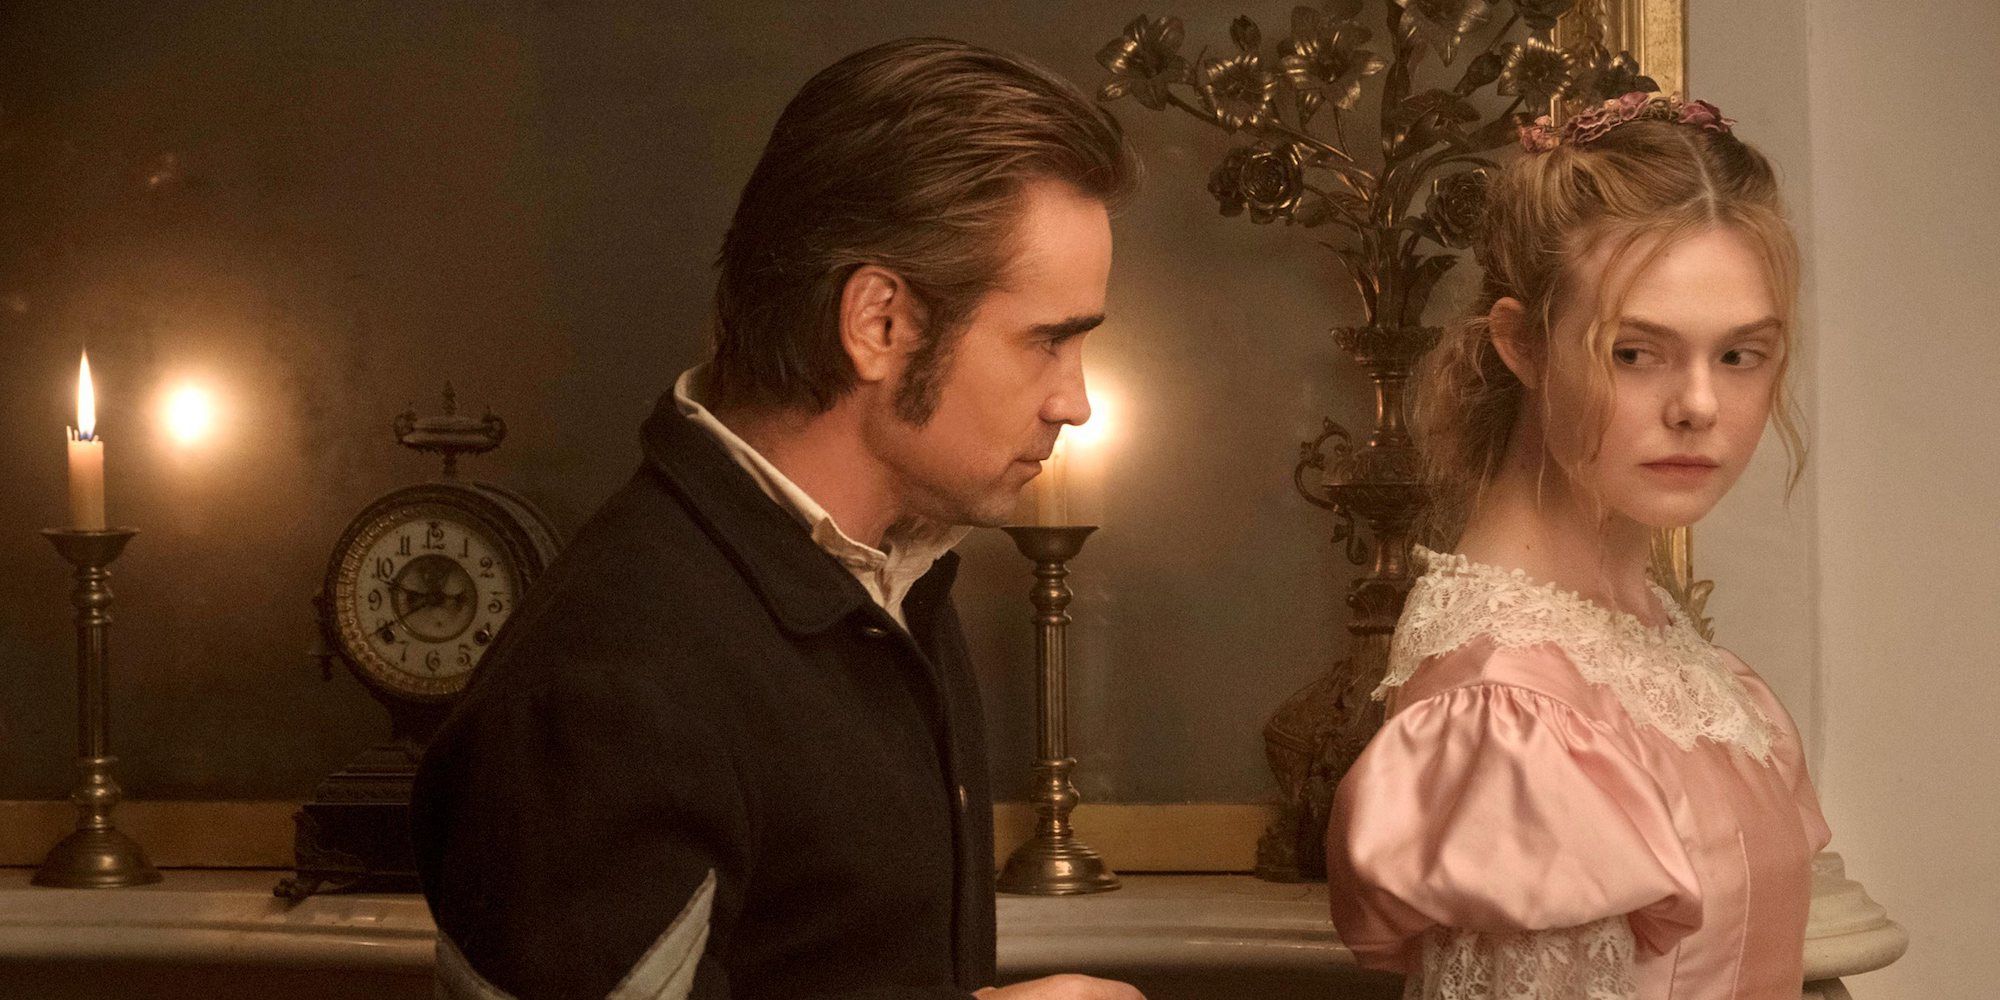 John and Alicia talking in The Beguiled.